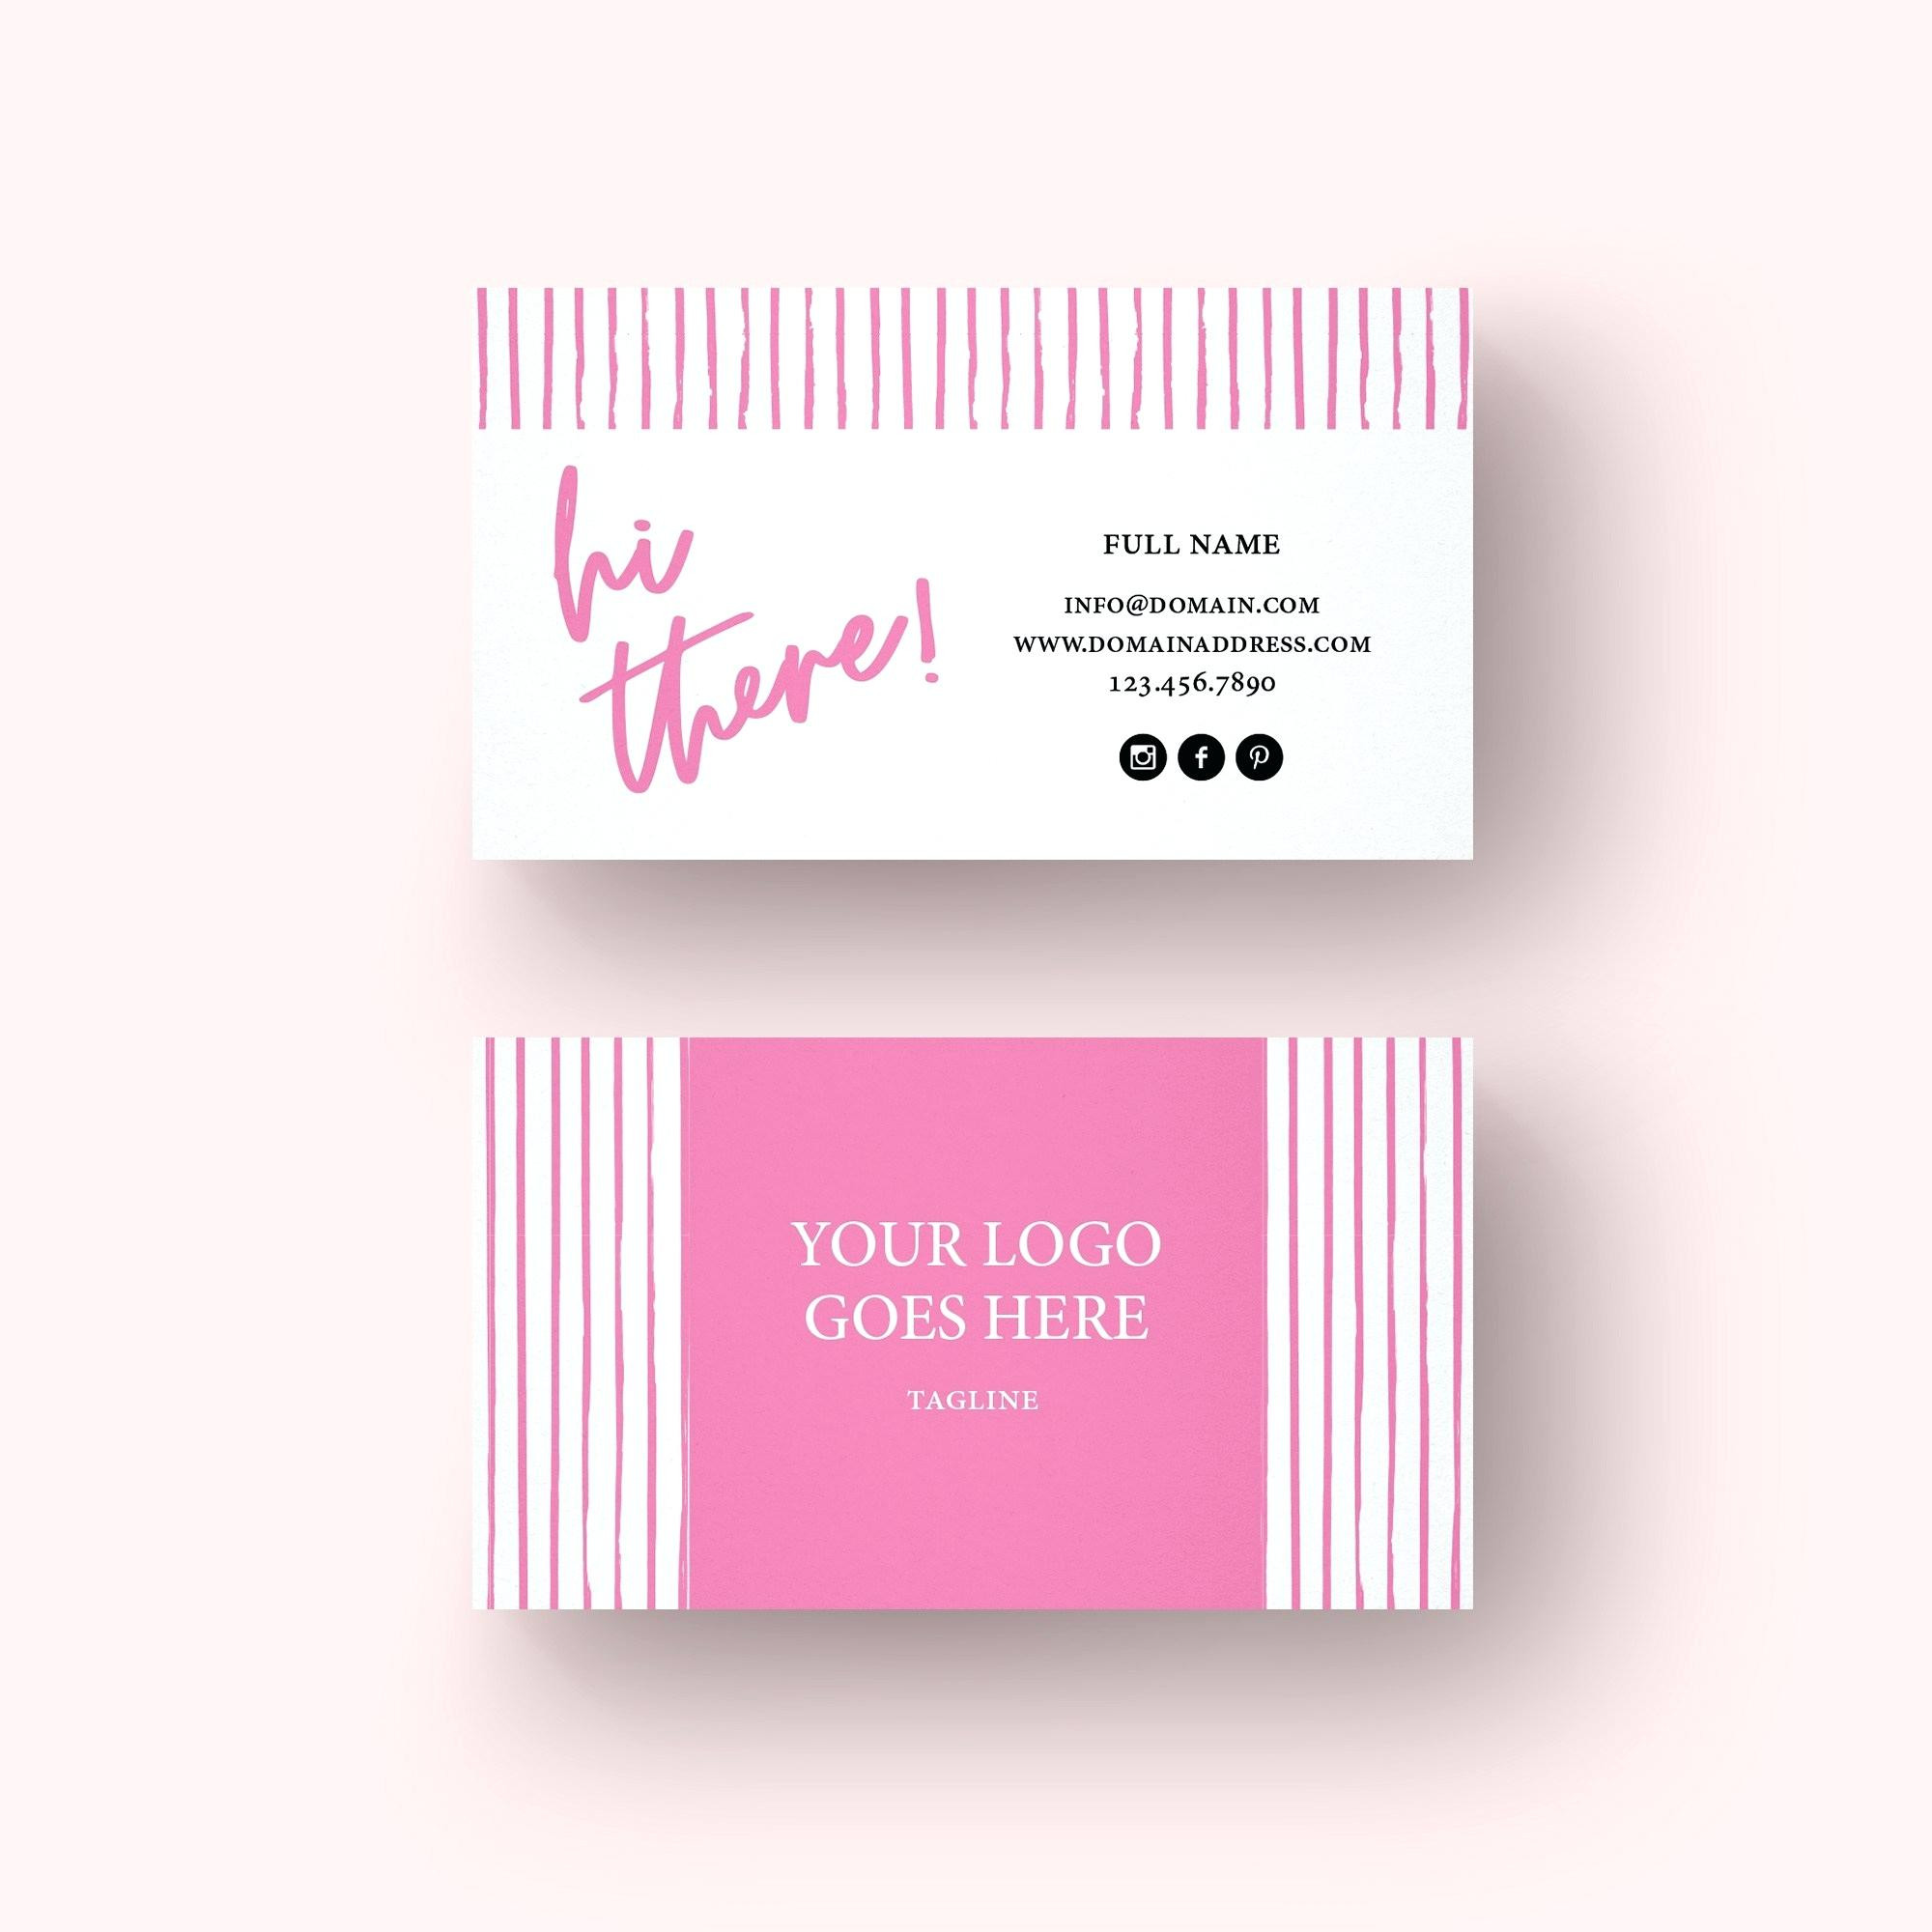 Social Media Marketing Business Card Template Free Editable Of Business Cards Templates Online Free